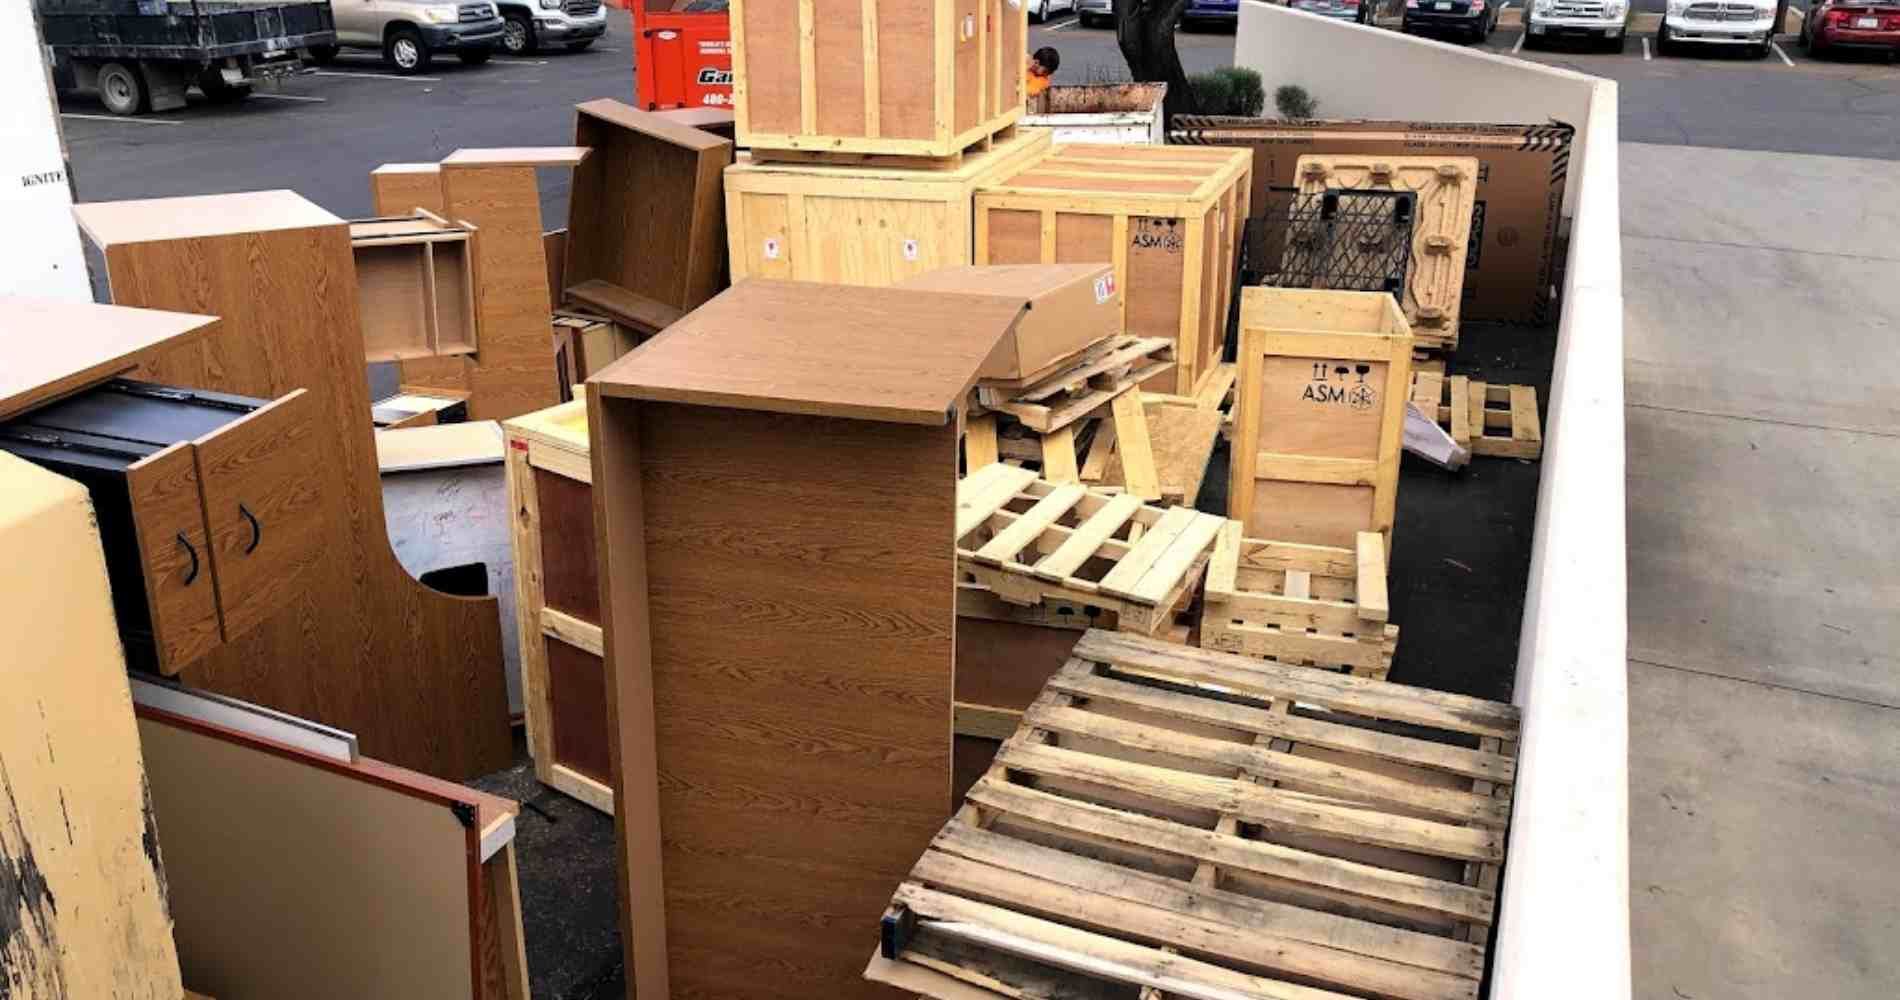 #1 for Pallet Disposal in Mesa, AZ With Over 1200 5-Star Reviews!